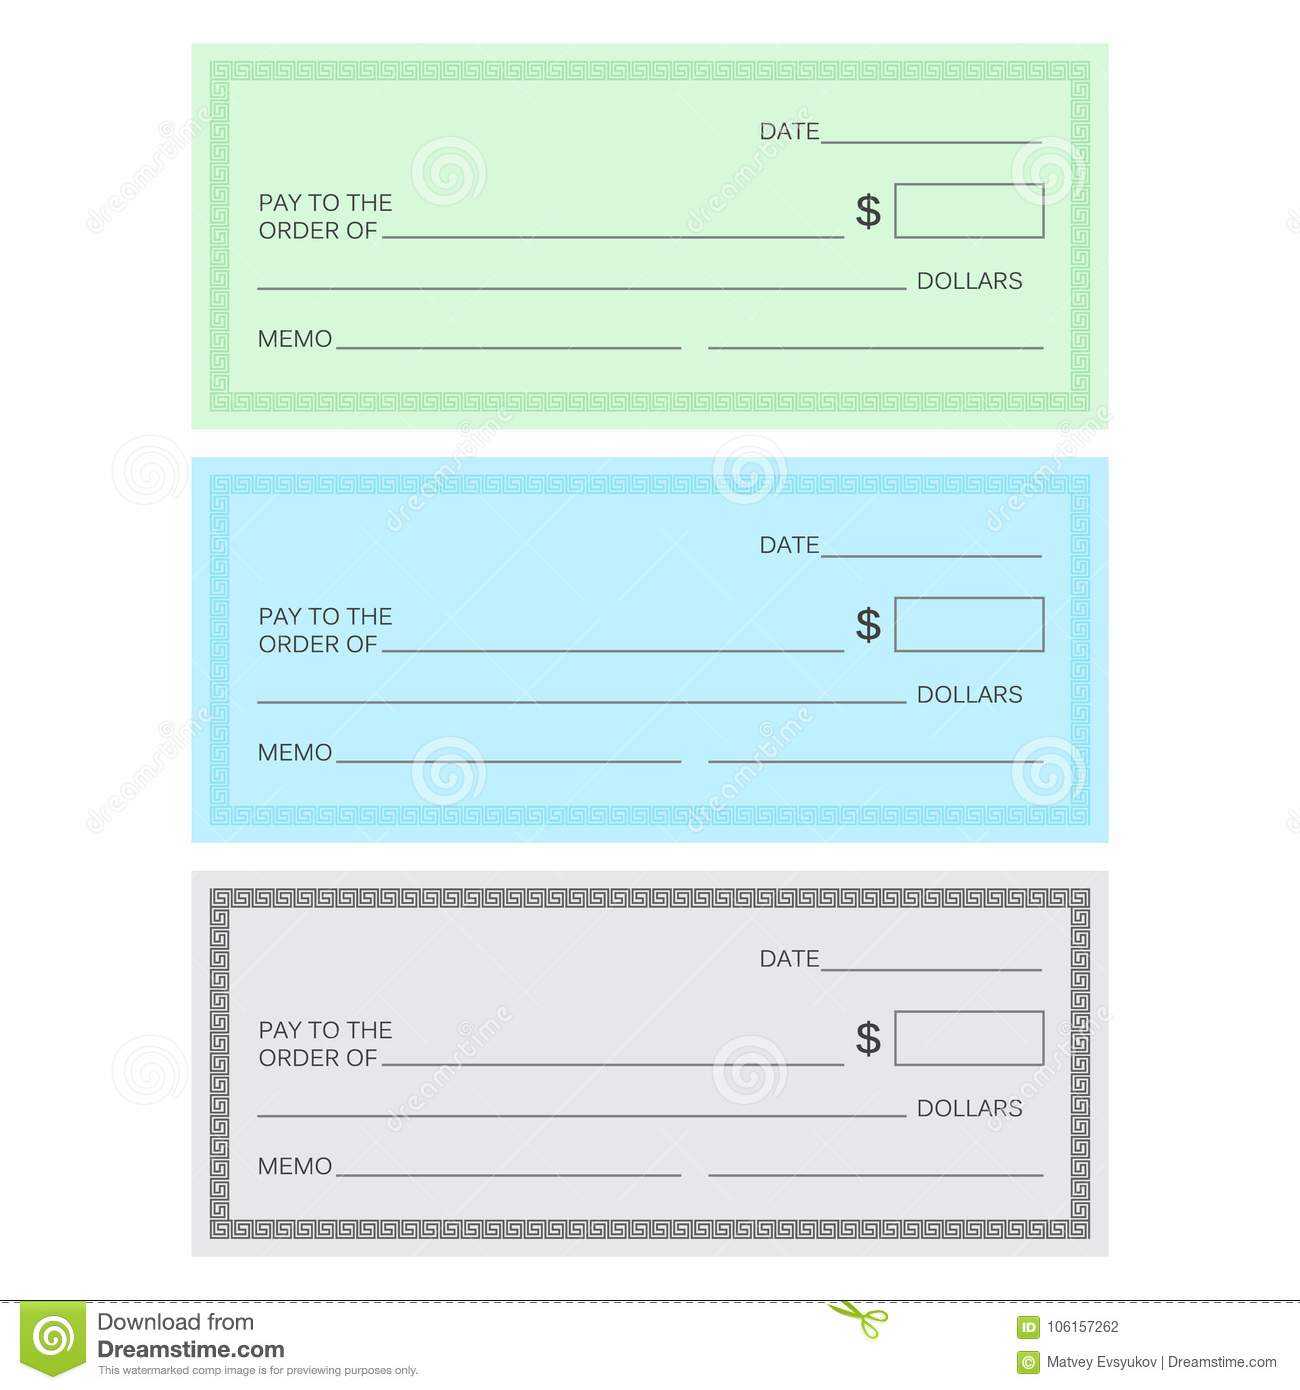 Blank Check Template. Check Template. Banking Check Templ With Blank Business Check Template